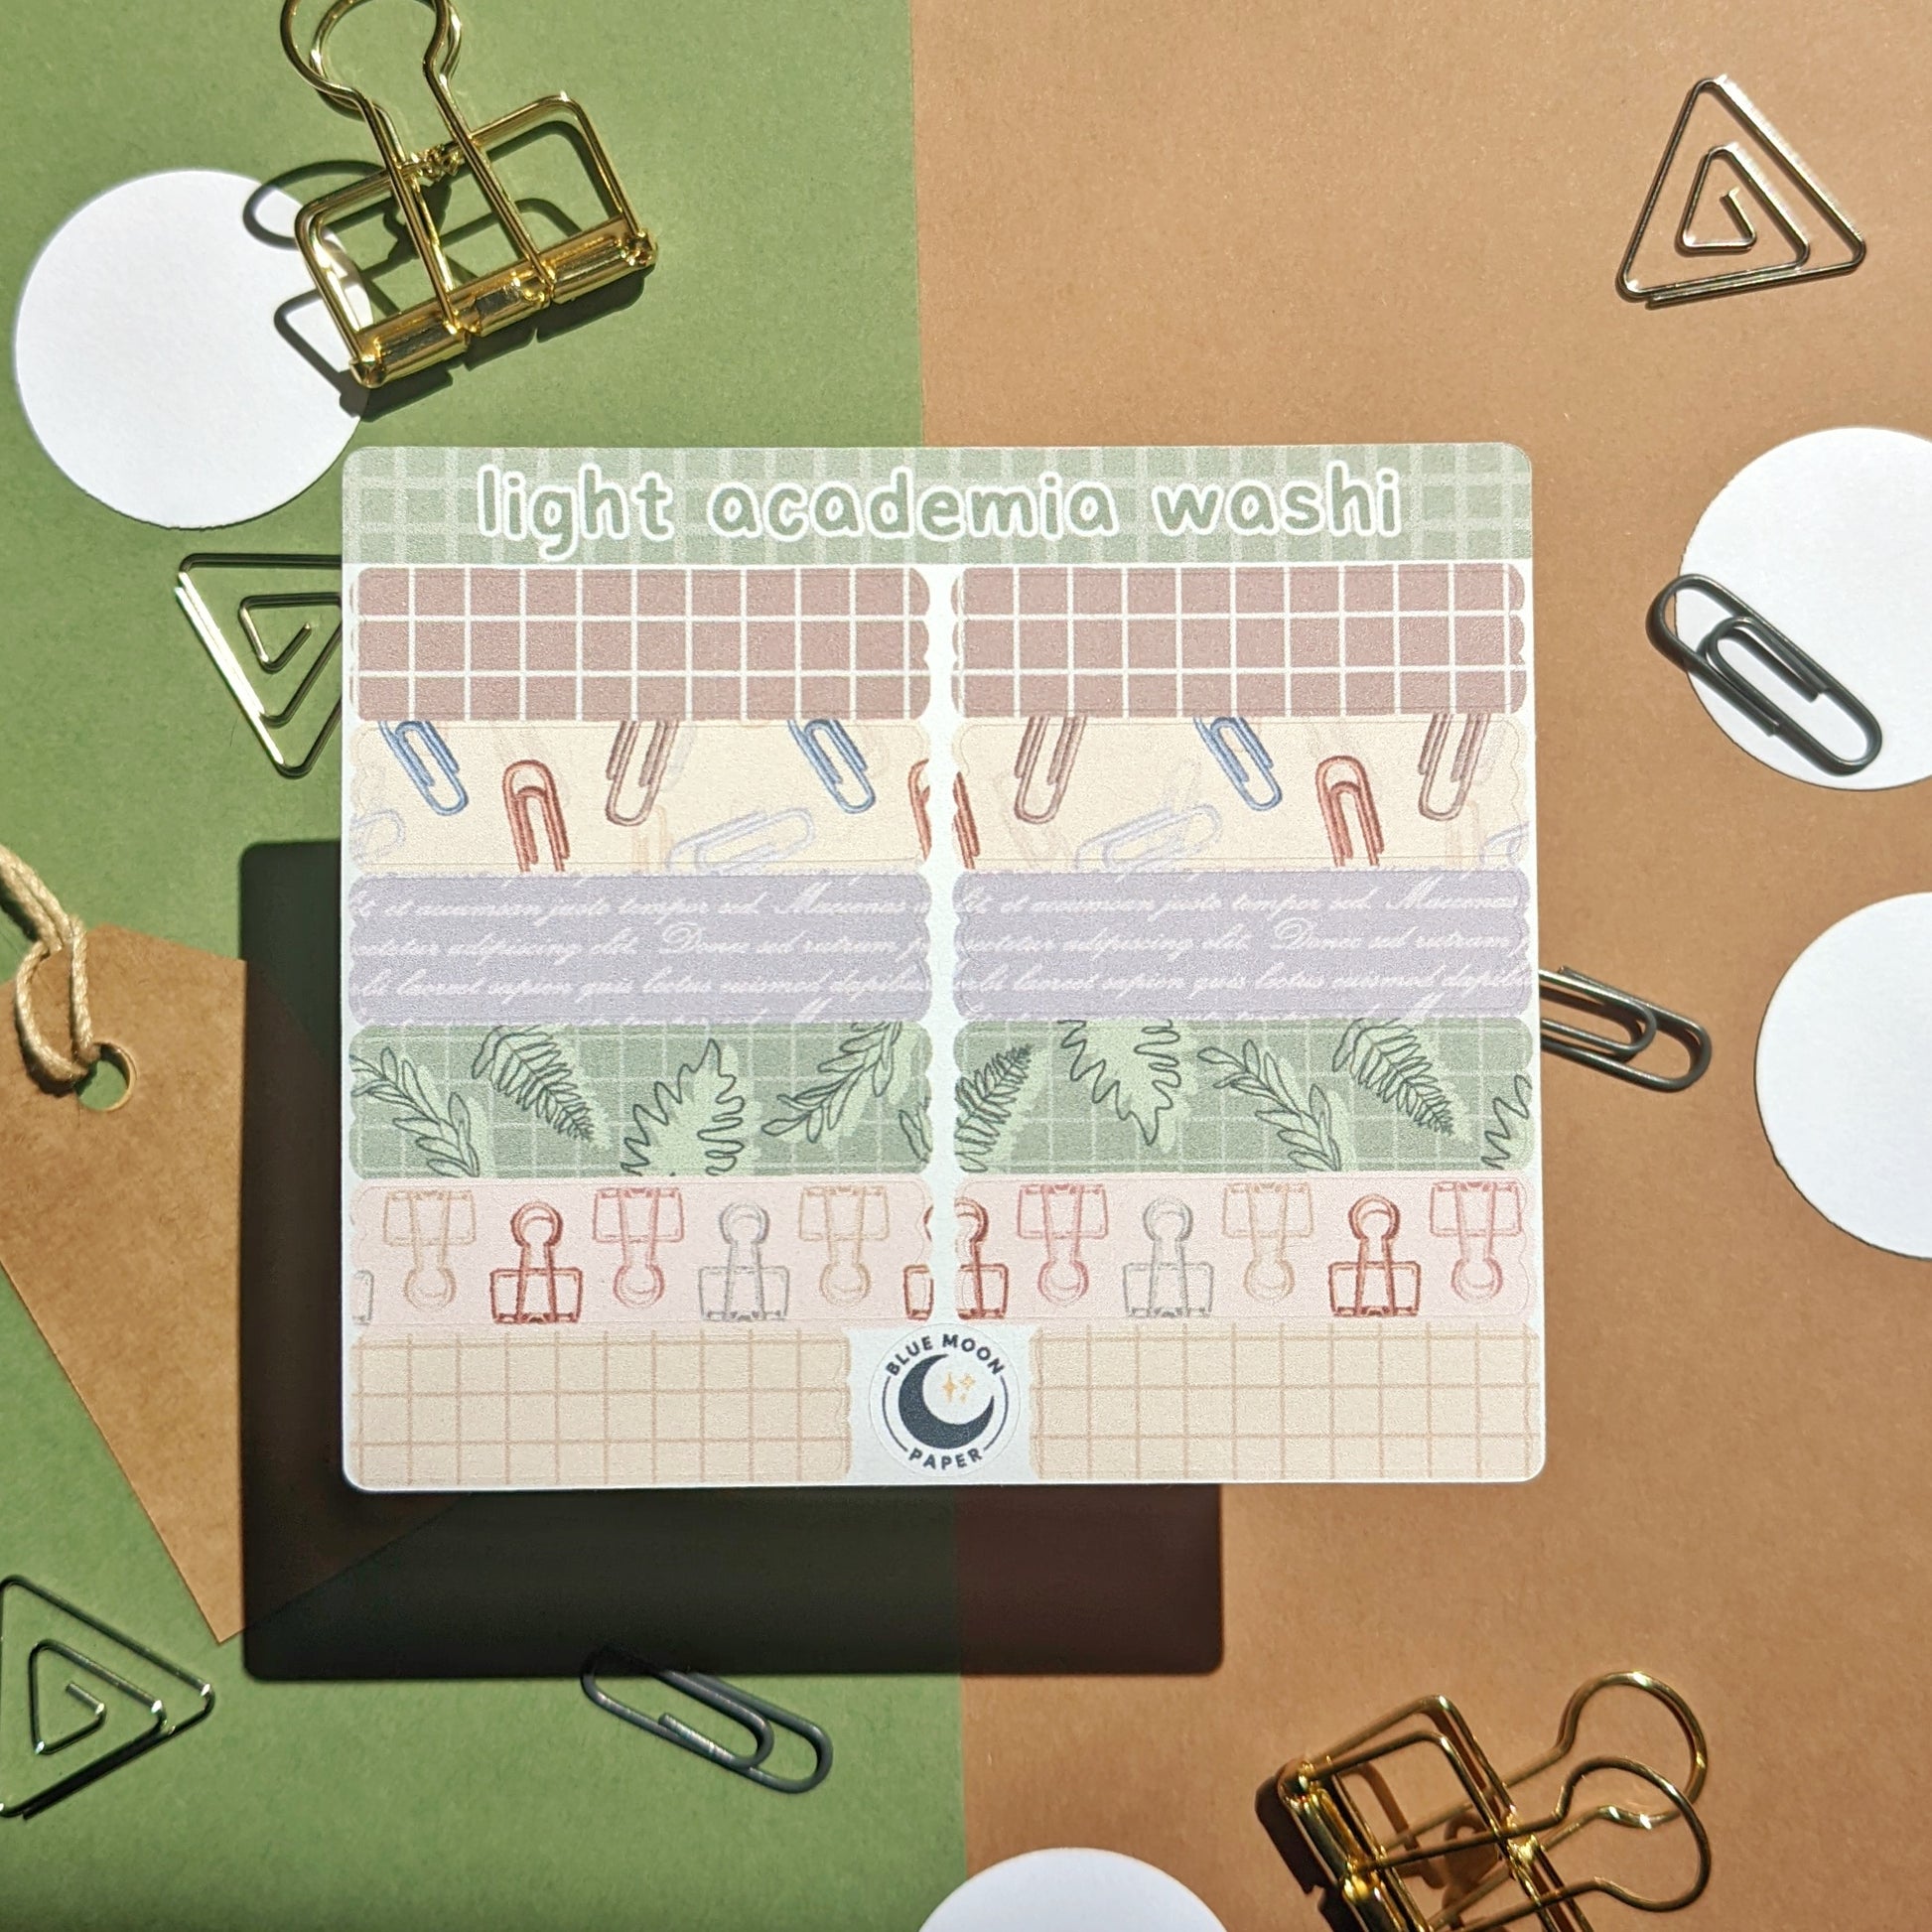 Sticker sheet with strips of illustrations such as grids, leaves, and illegible text.